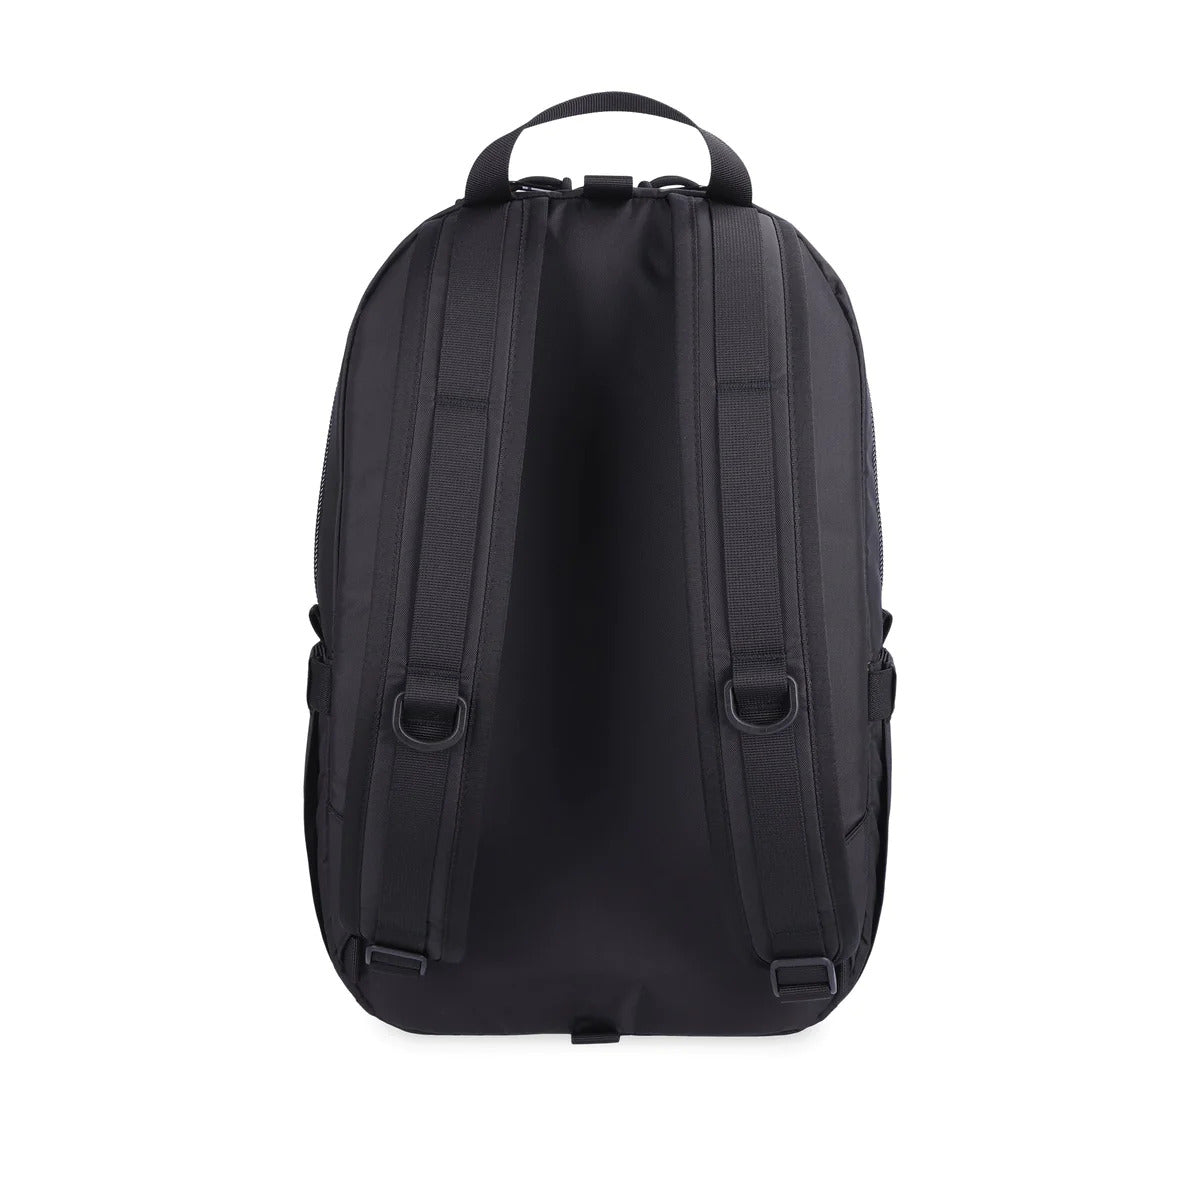 Back view of Topo Designs Light Pack in recycled "Black" nylon.